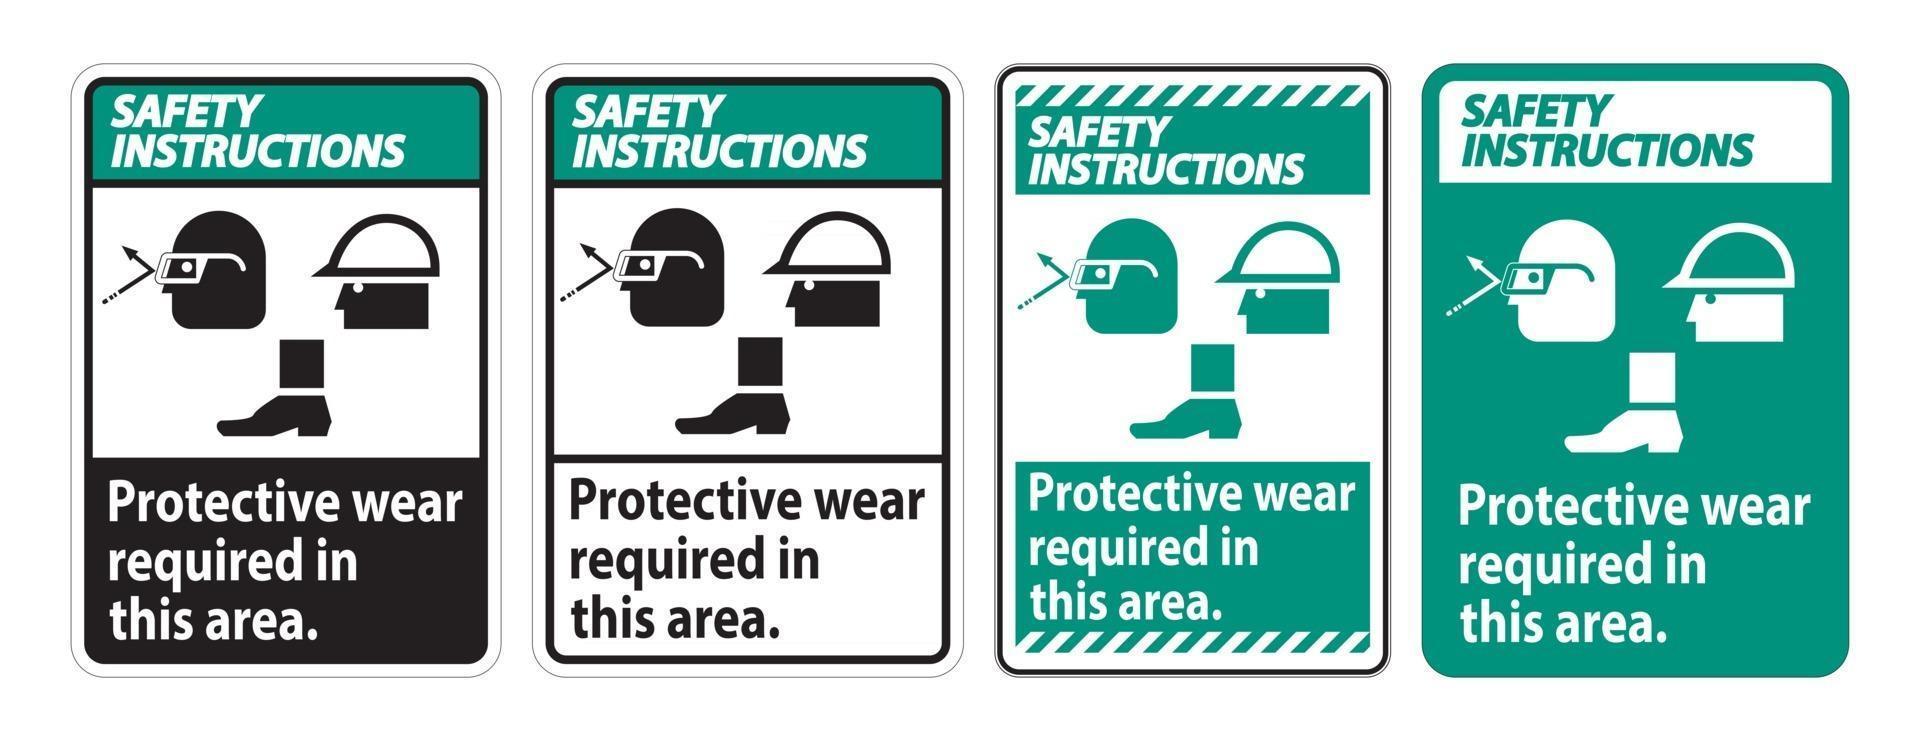 Safety Instructions Sign Protective Wear Is Required In This Area.With Goggles, Hard Hat, And Boots Symbols on white background vector